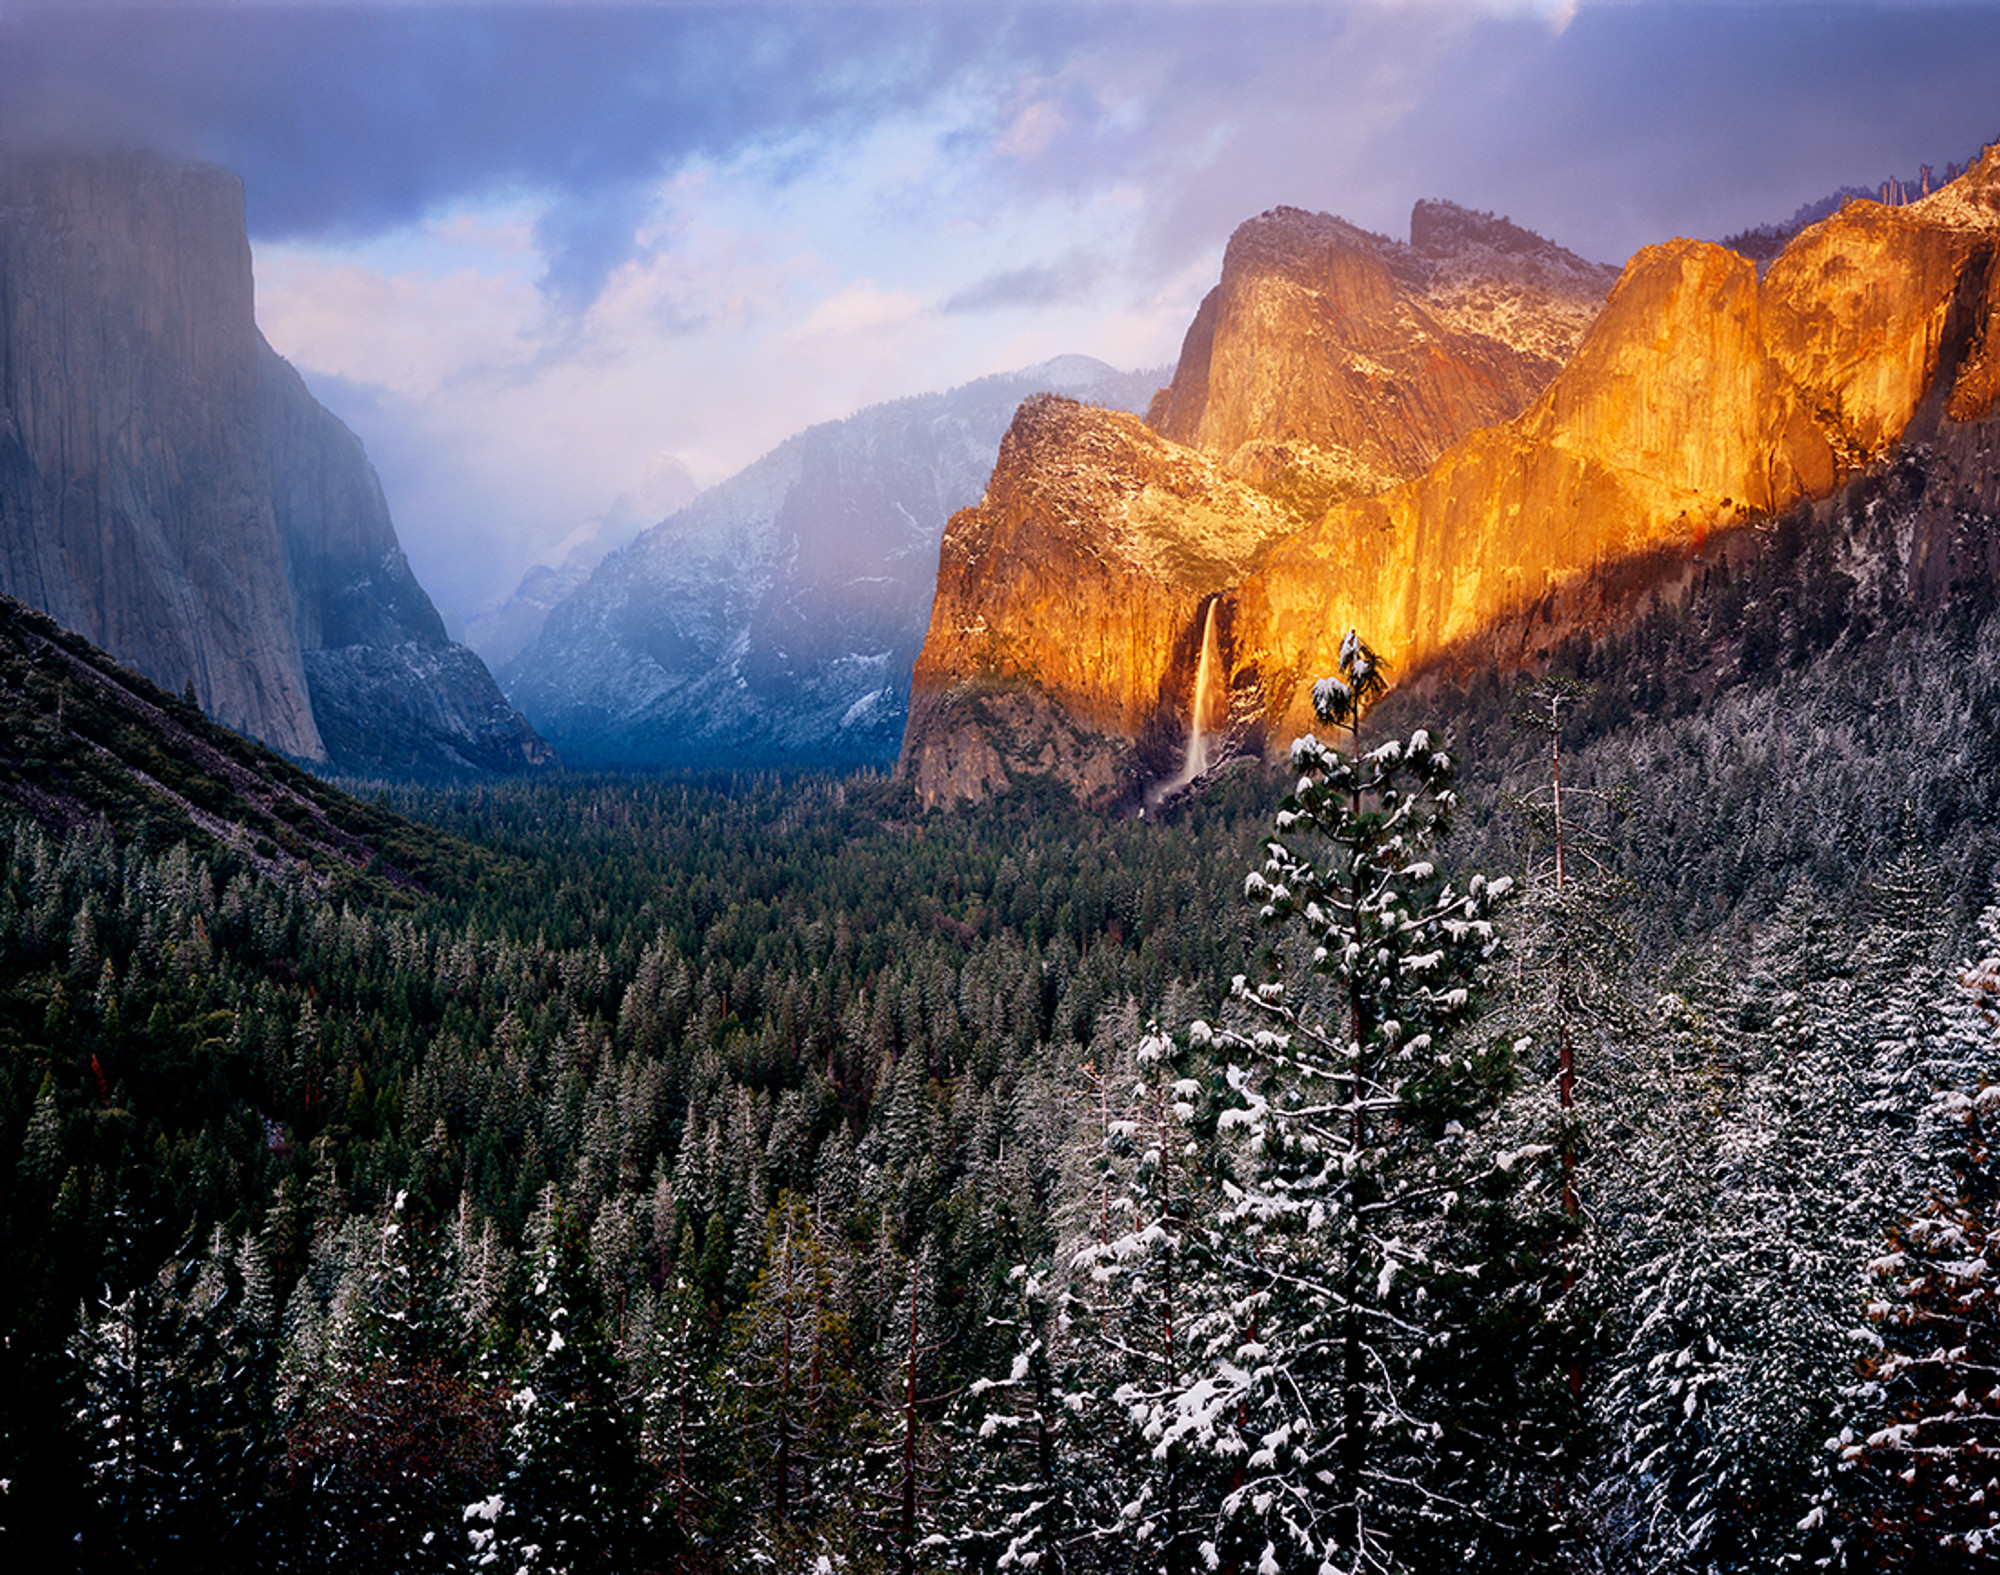 Yosemite Valley View in March - Vern Clevenger Photography